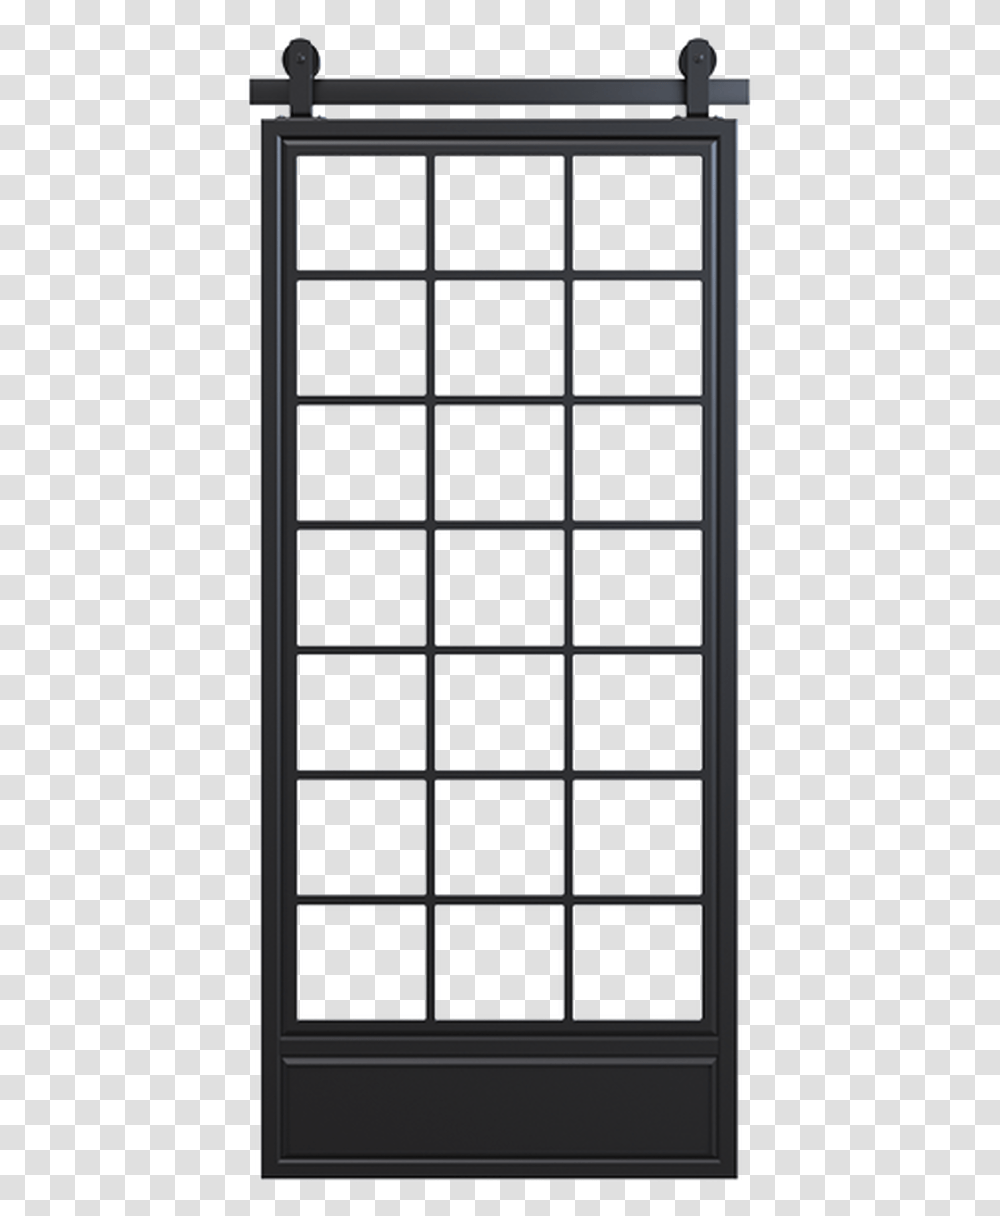 Bottom Panel Square Pane Metal Barn Door With Glass Home Door, Picture Window, Grille, Silhouette Transparent Png